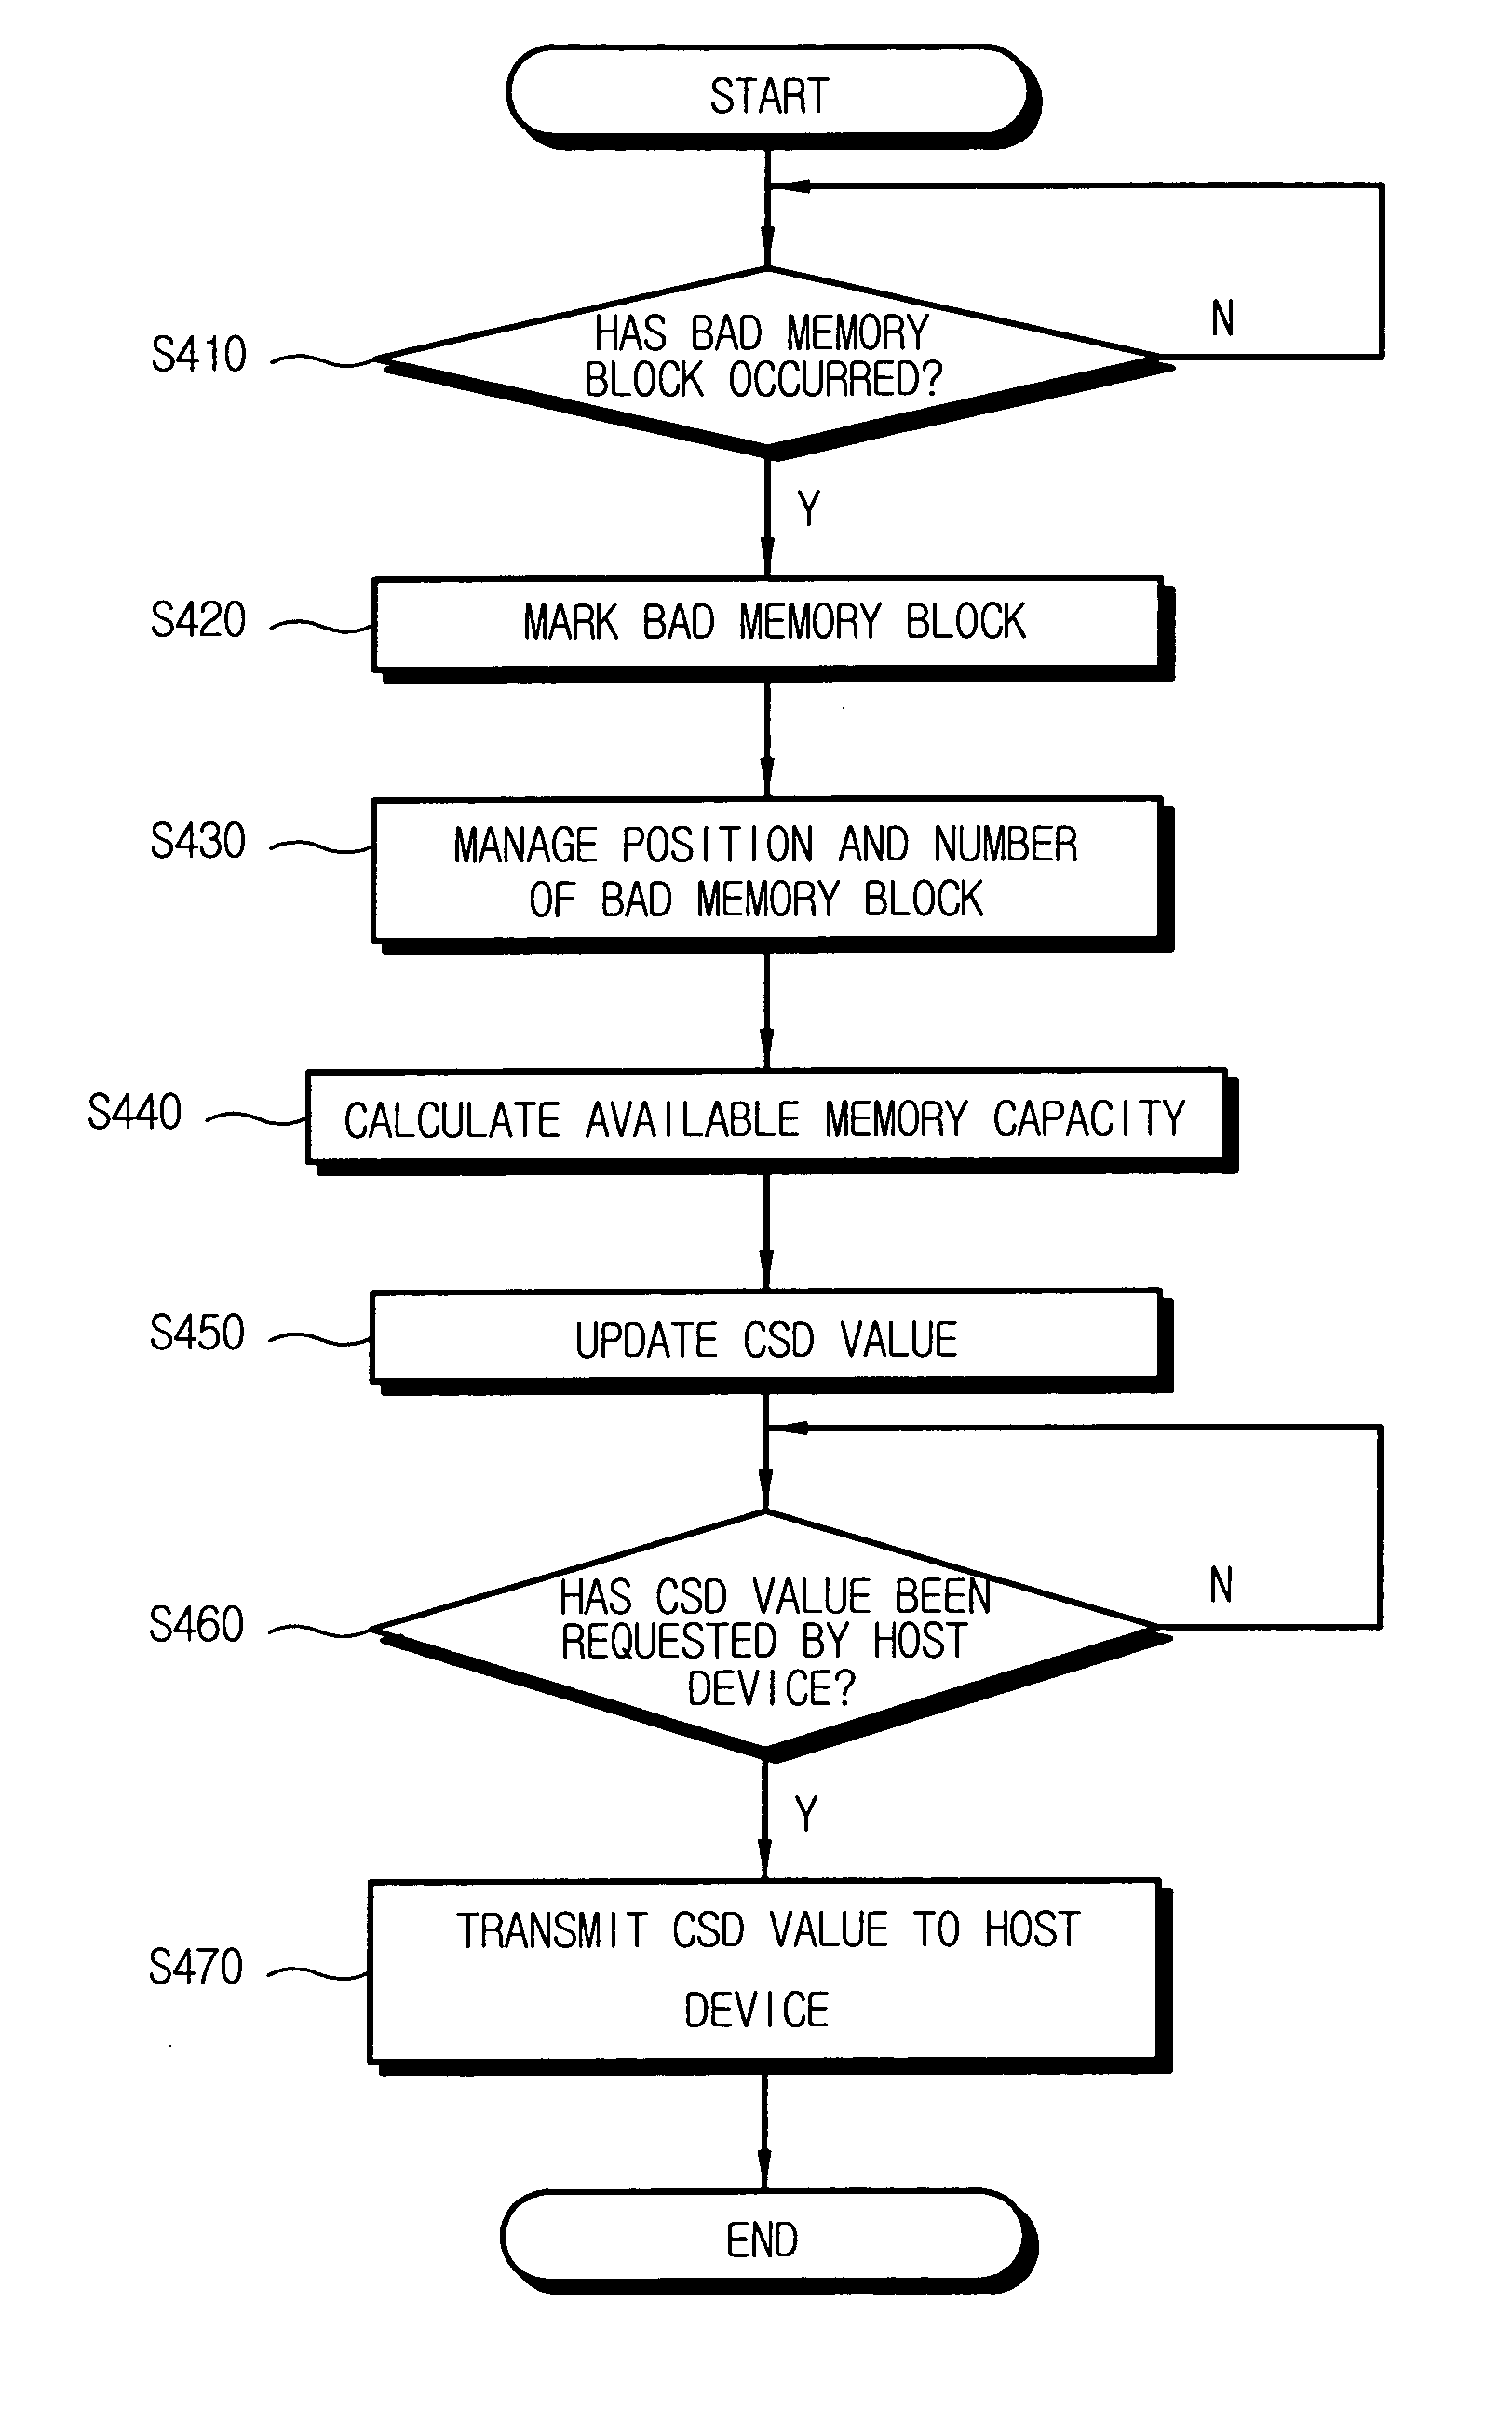 Non-volatile memory card apparatus and method for updating memory capacity information